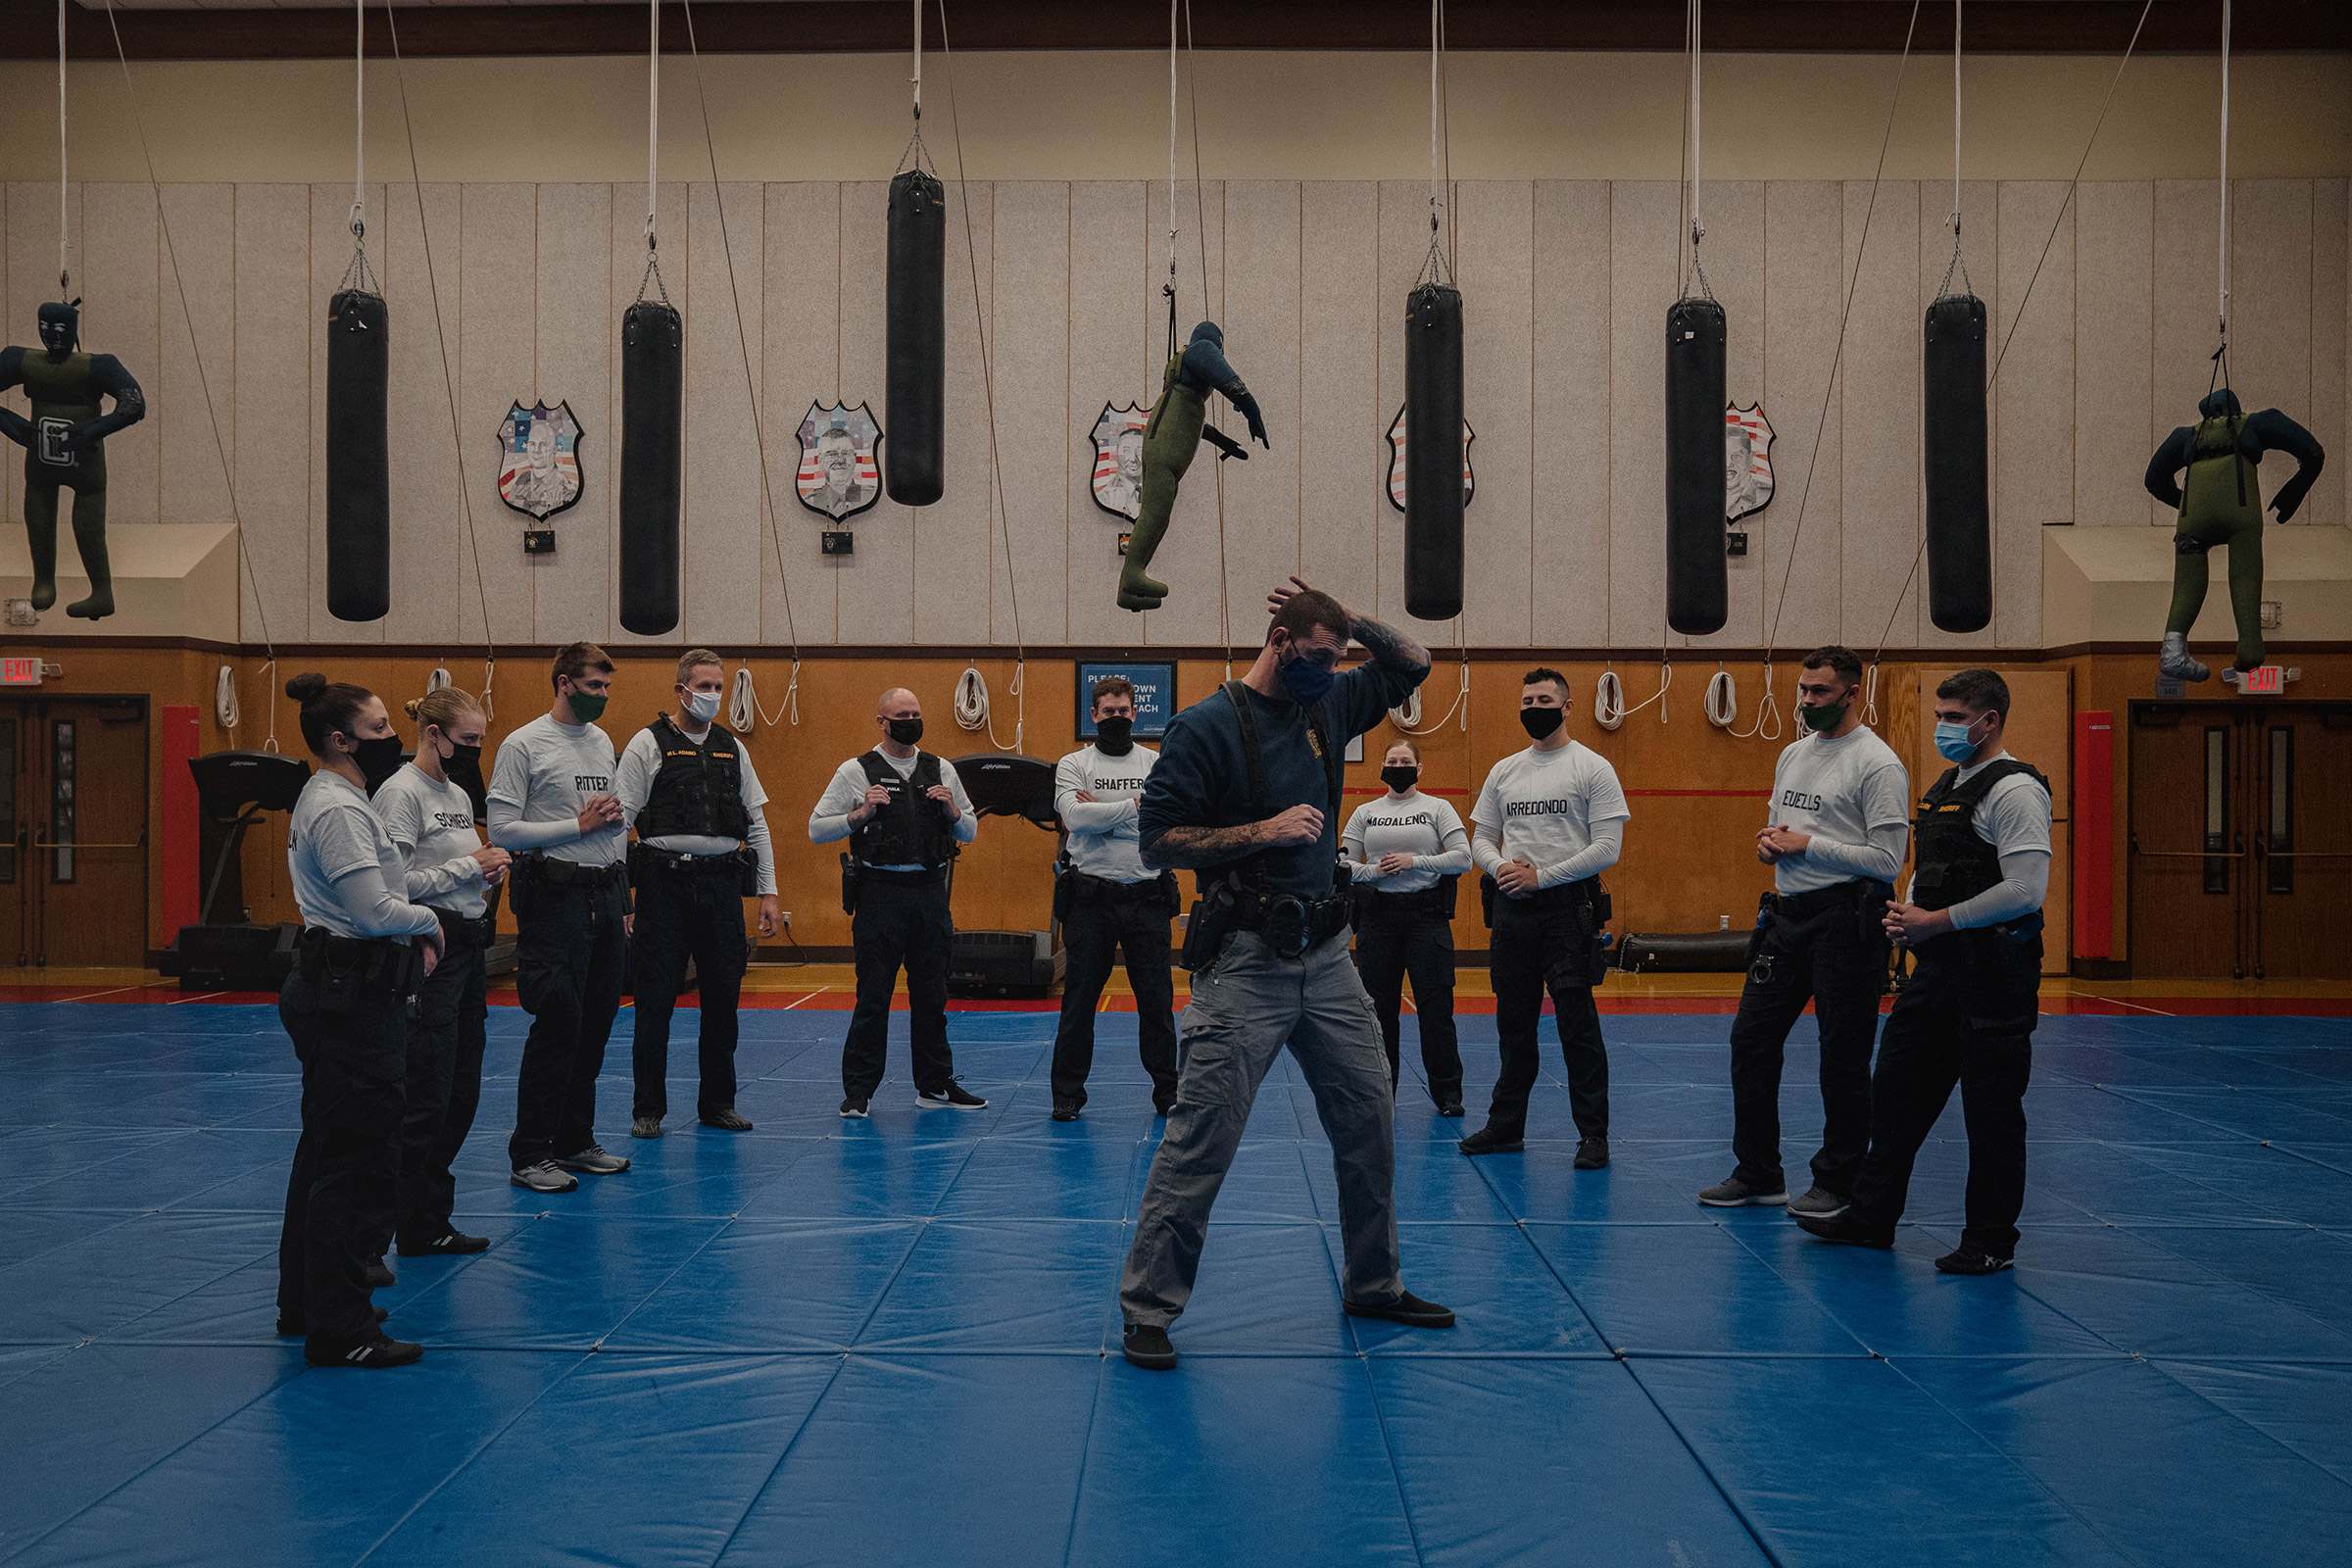 With punching bags and dummies overhead, instructor Javier Sola teaches frisking and handcuffing techniques to recruits at the Washington State Criminal Justice Training Commission facility in Burien, Wash., on Oct. 22. Washington State is one of the few places in the U.S. that requires all recruits to go through the state-run Basic Law Enforcement Academy, except for those becoming state patrol officers, a system that advocates of police reform support. (Jovelle Tamayo for TIME)